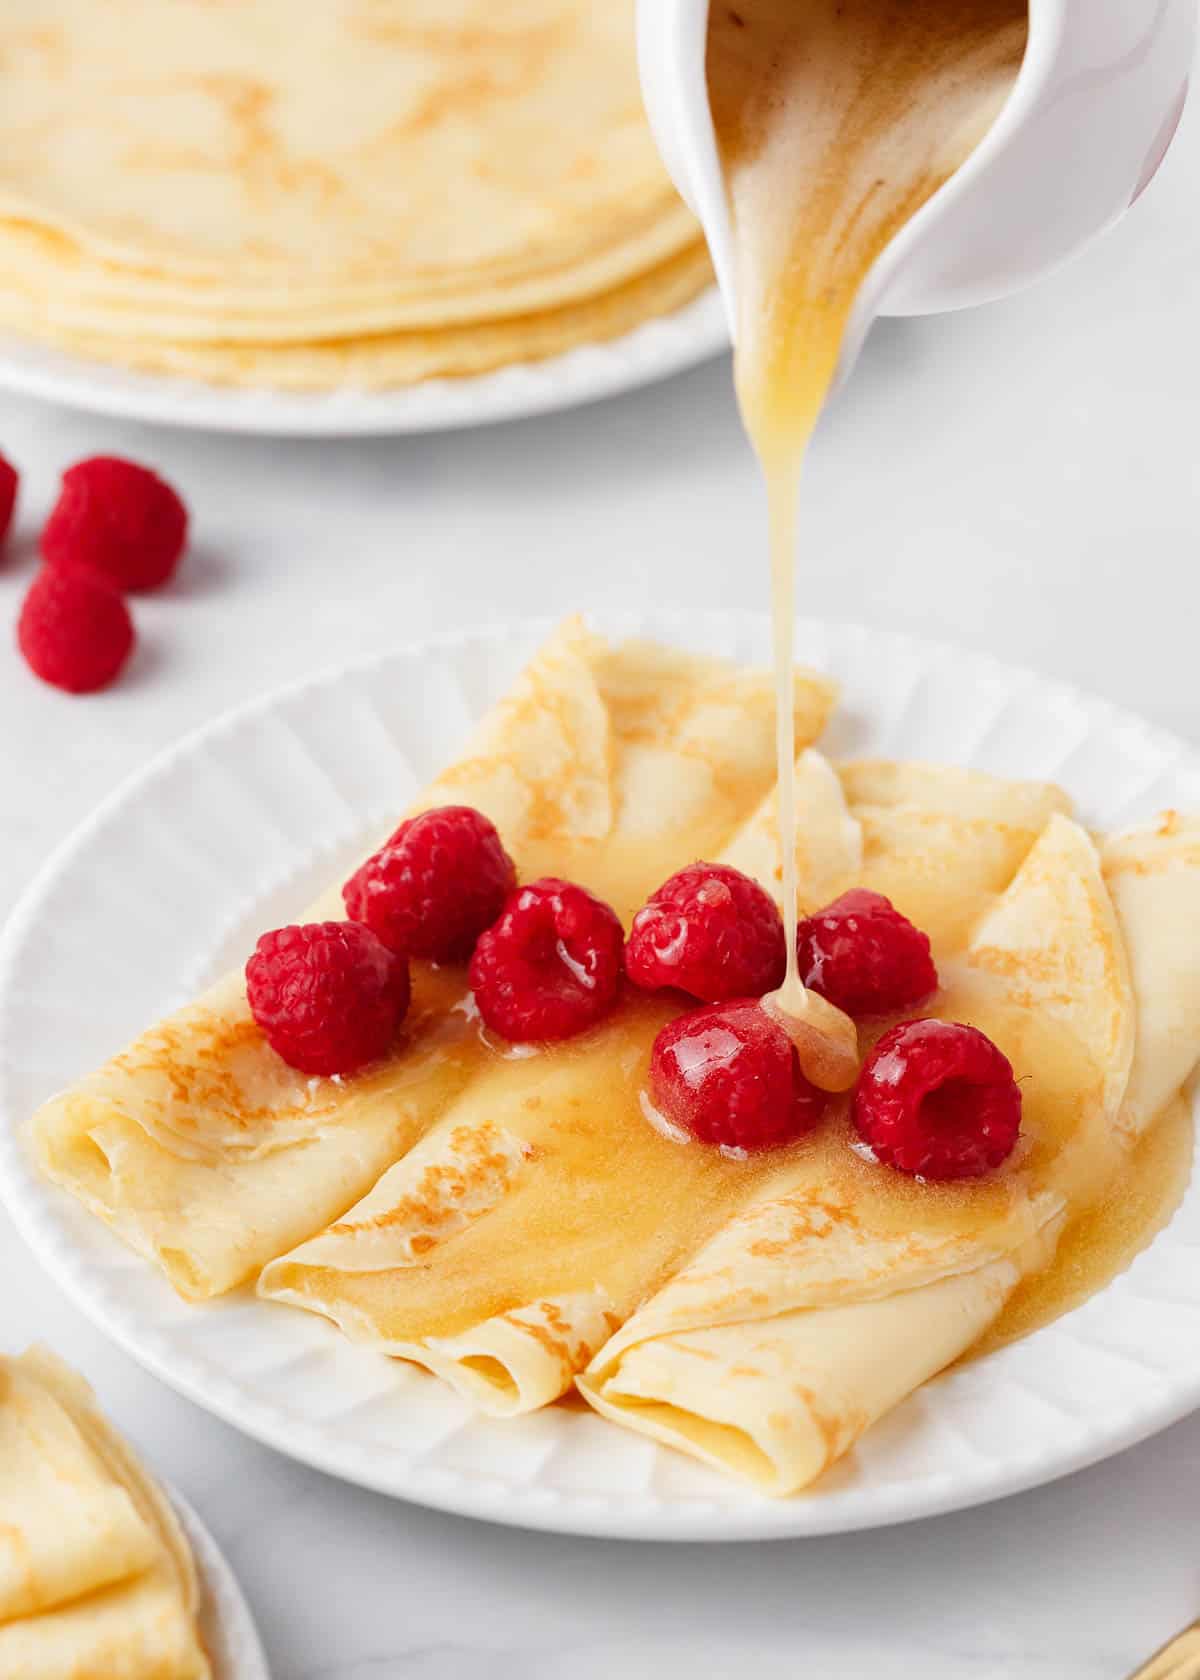 Pouring syrup onto swedish pancakes on a white plate.